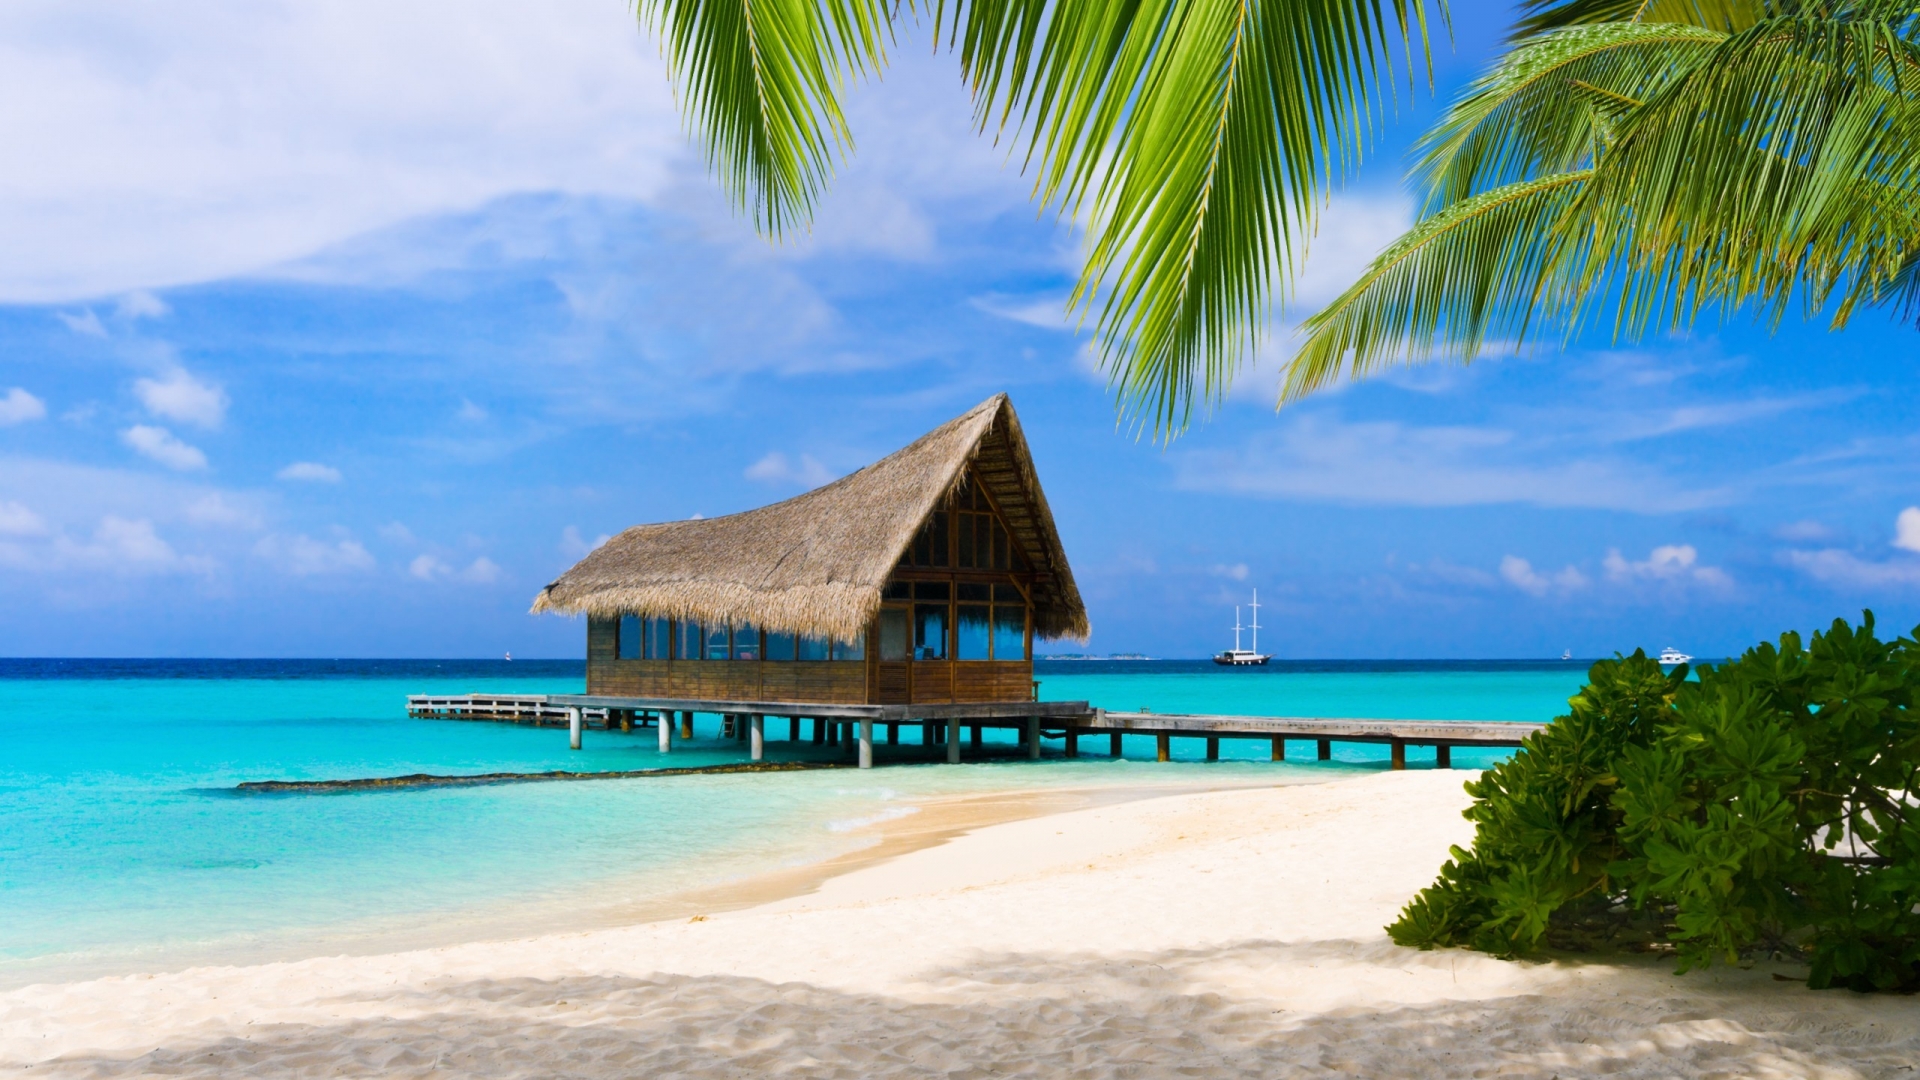 Bungalow in Maldives for 1920 x 1080 HDTV 1080p resolution